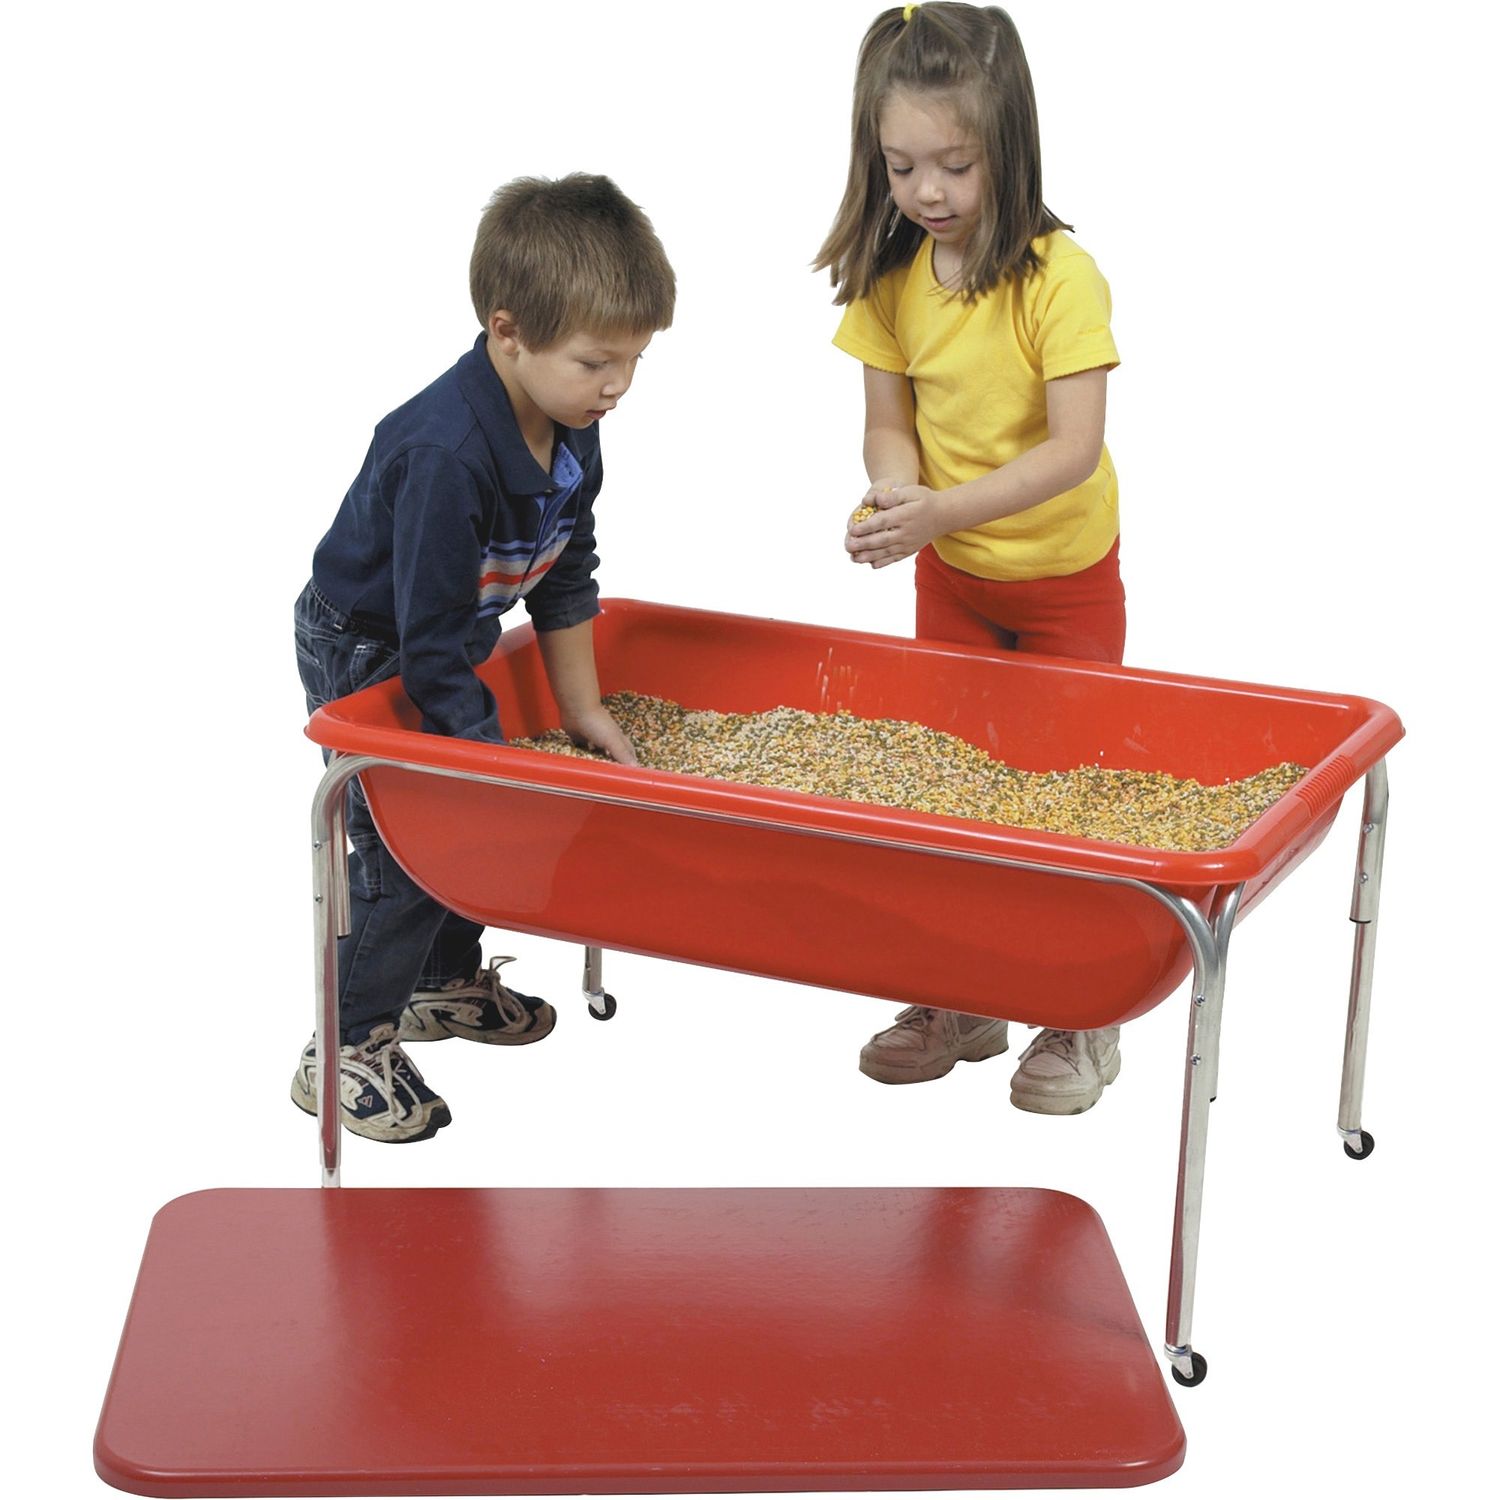 24" Large Sensory Table and Lid Set Rectangle Top, Four Leg Base, 4 Legs, 36" Table Top Length x 24" Table Top Width, 24" Height, Red, Plastic